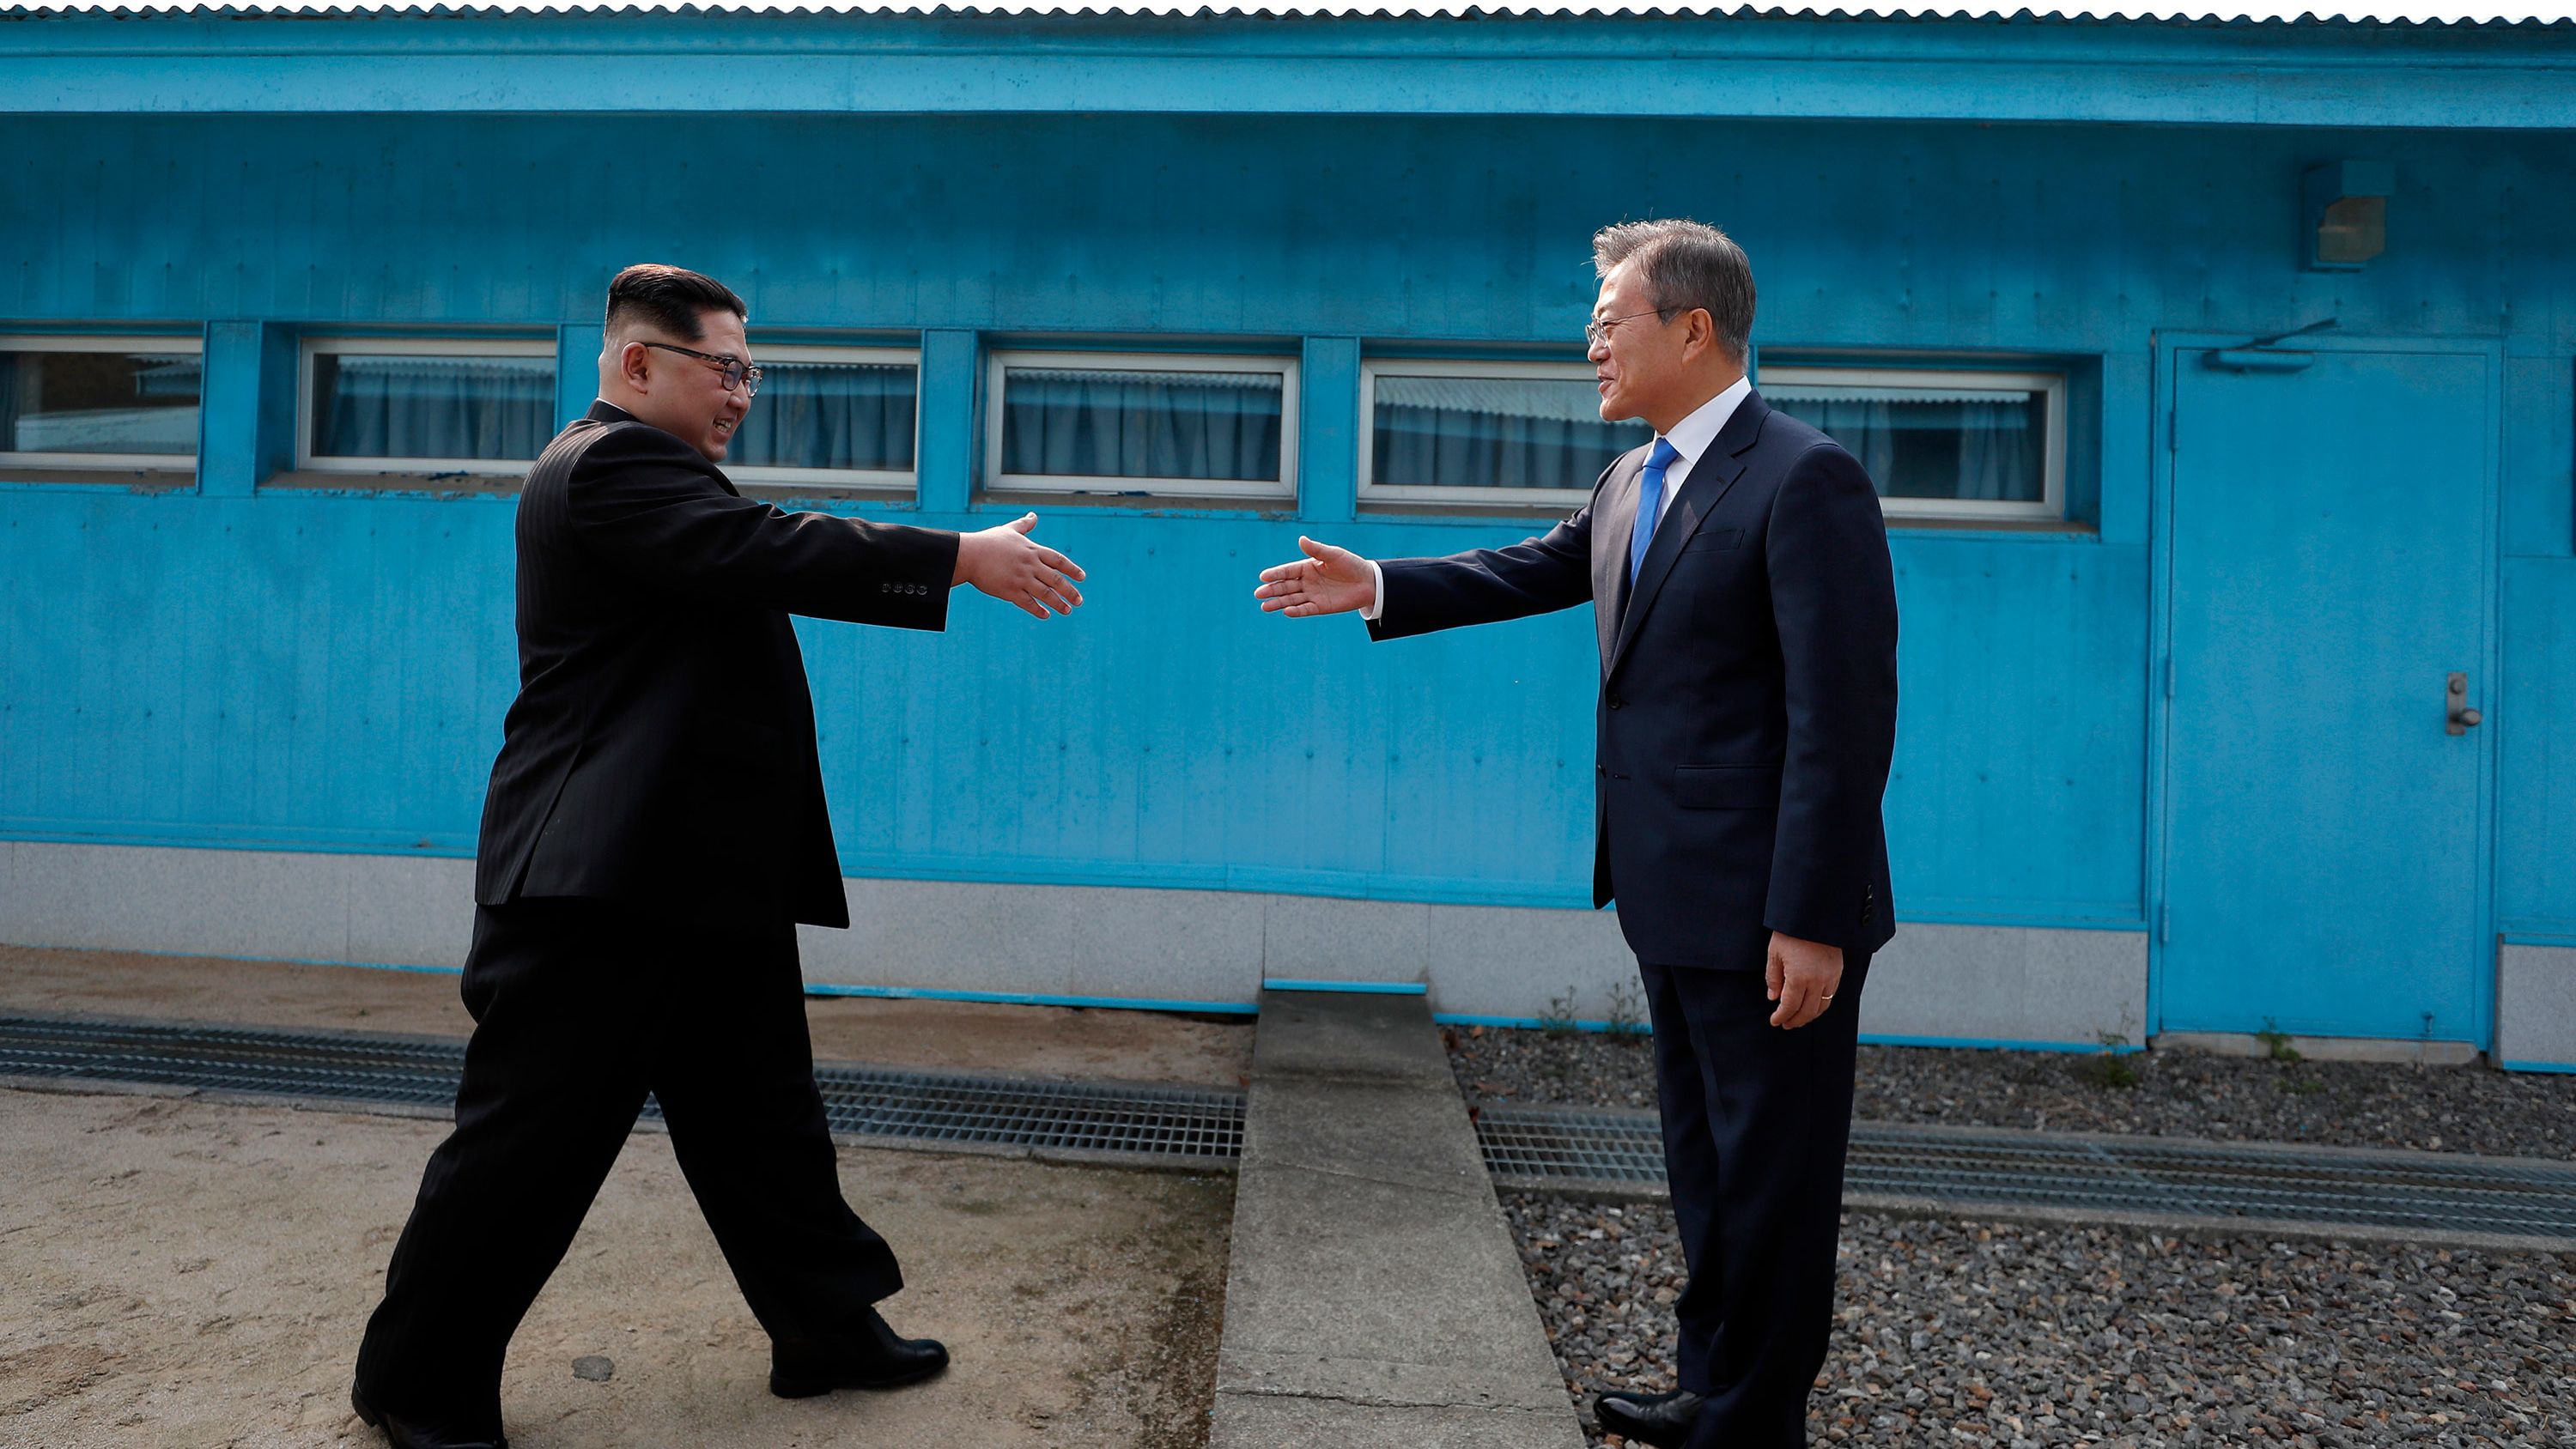 North Korean Leader Kim Jong Un (left) and South Korean President Moon Jae-in (right) shake hands over the military demarcation line that divides the demilitarized zone upon meeting for the inter-Korean Summit on Friday.